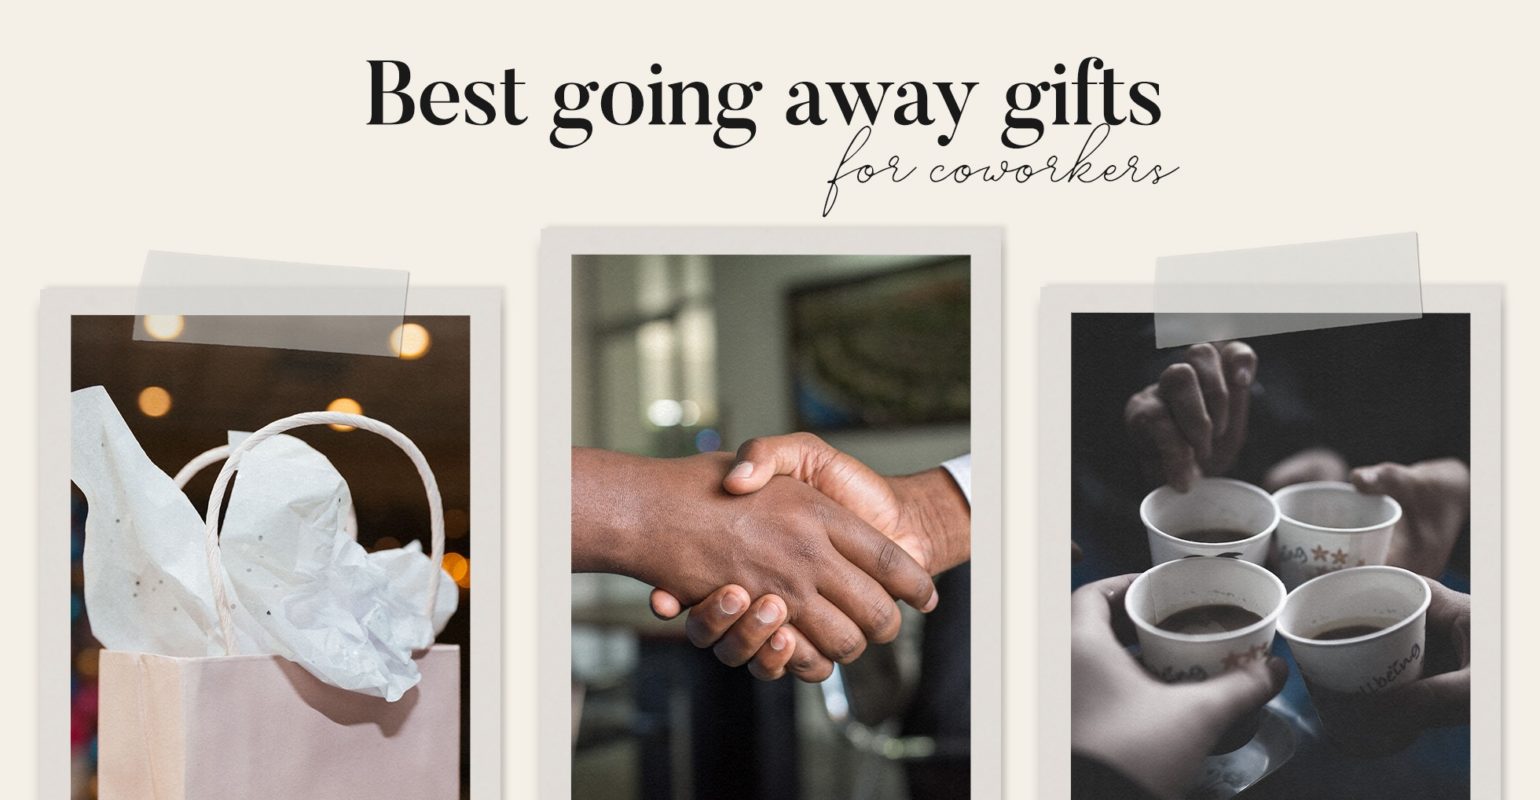 7 Best Going Away Gifts for Coworkers Guide